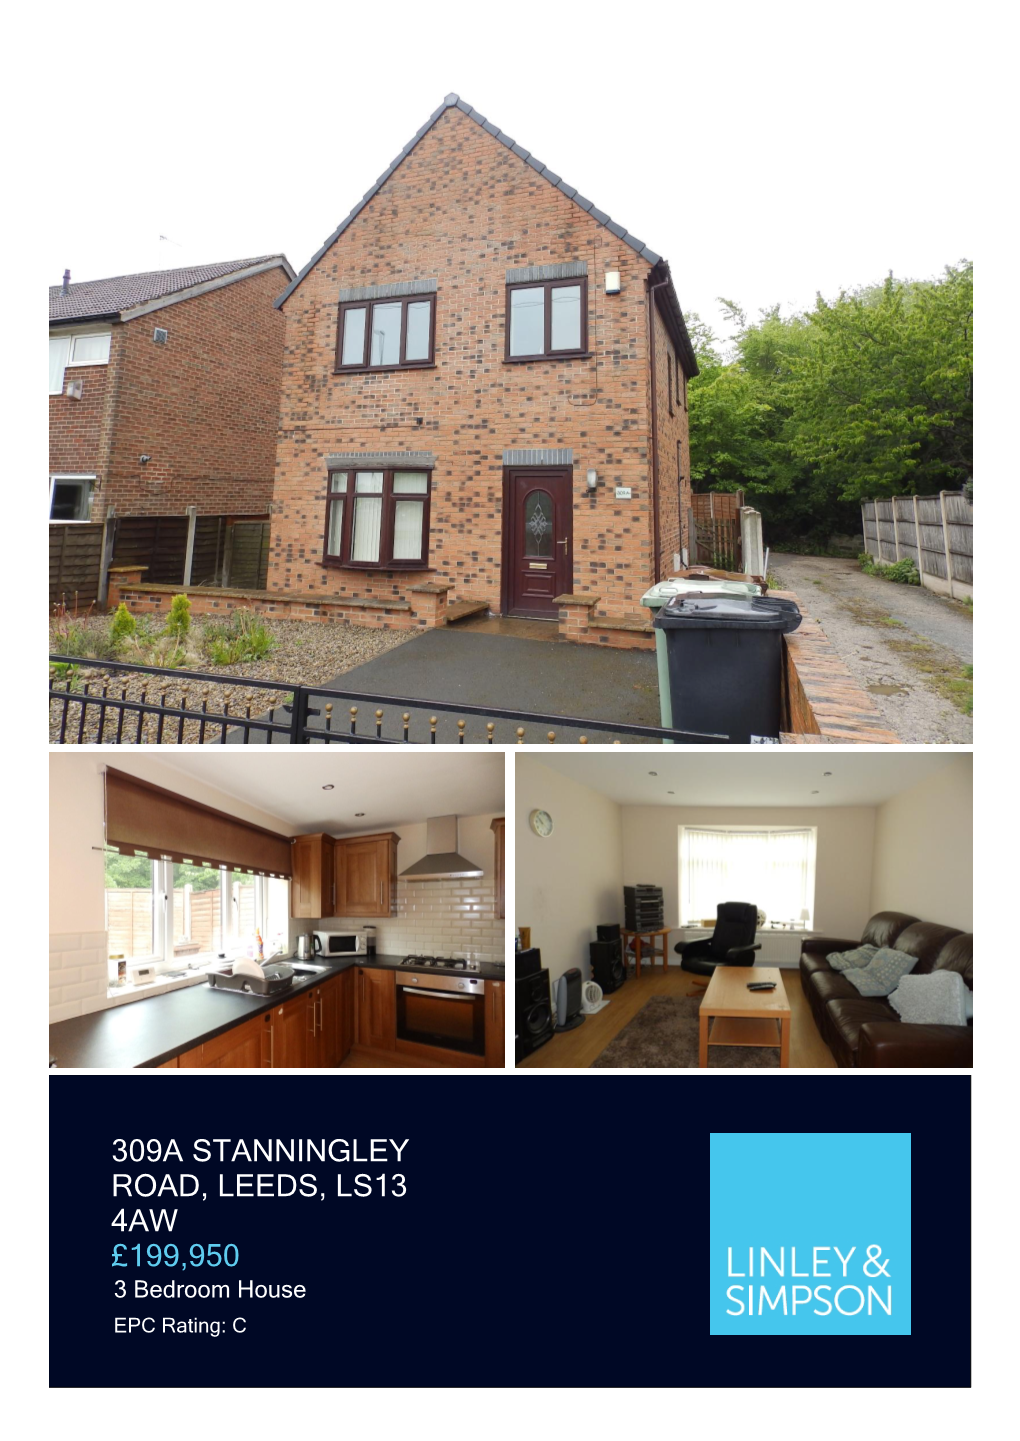 309A Stanningley Road, Leeds, Ls13 4Aw £199,950